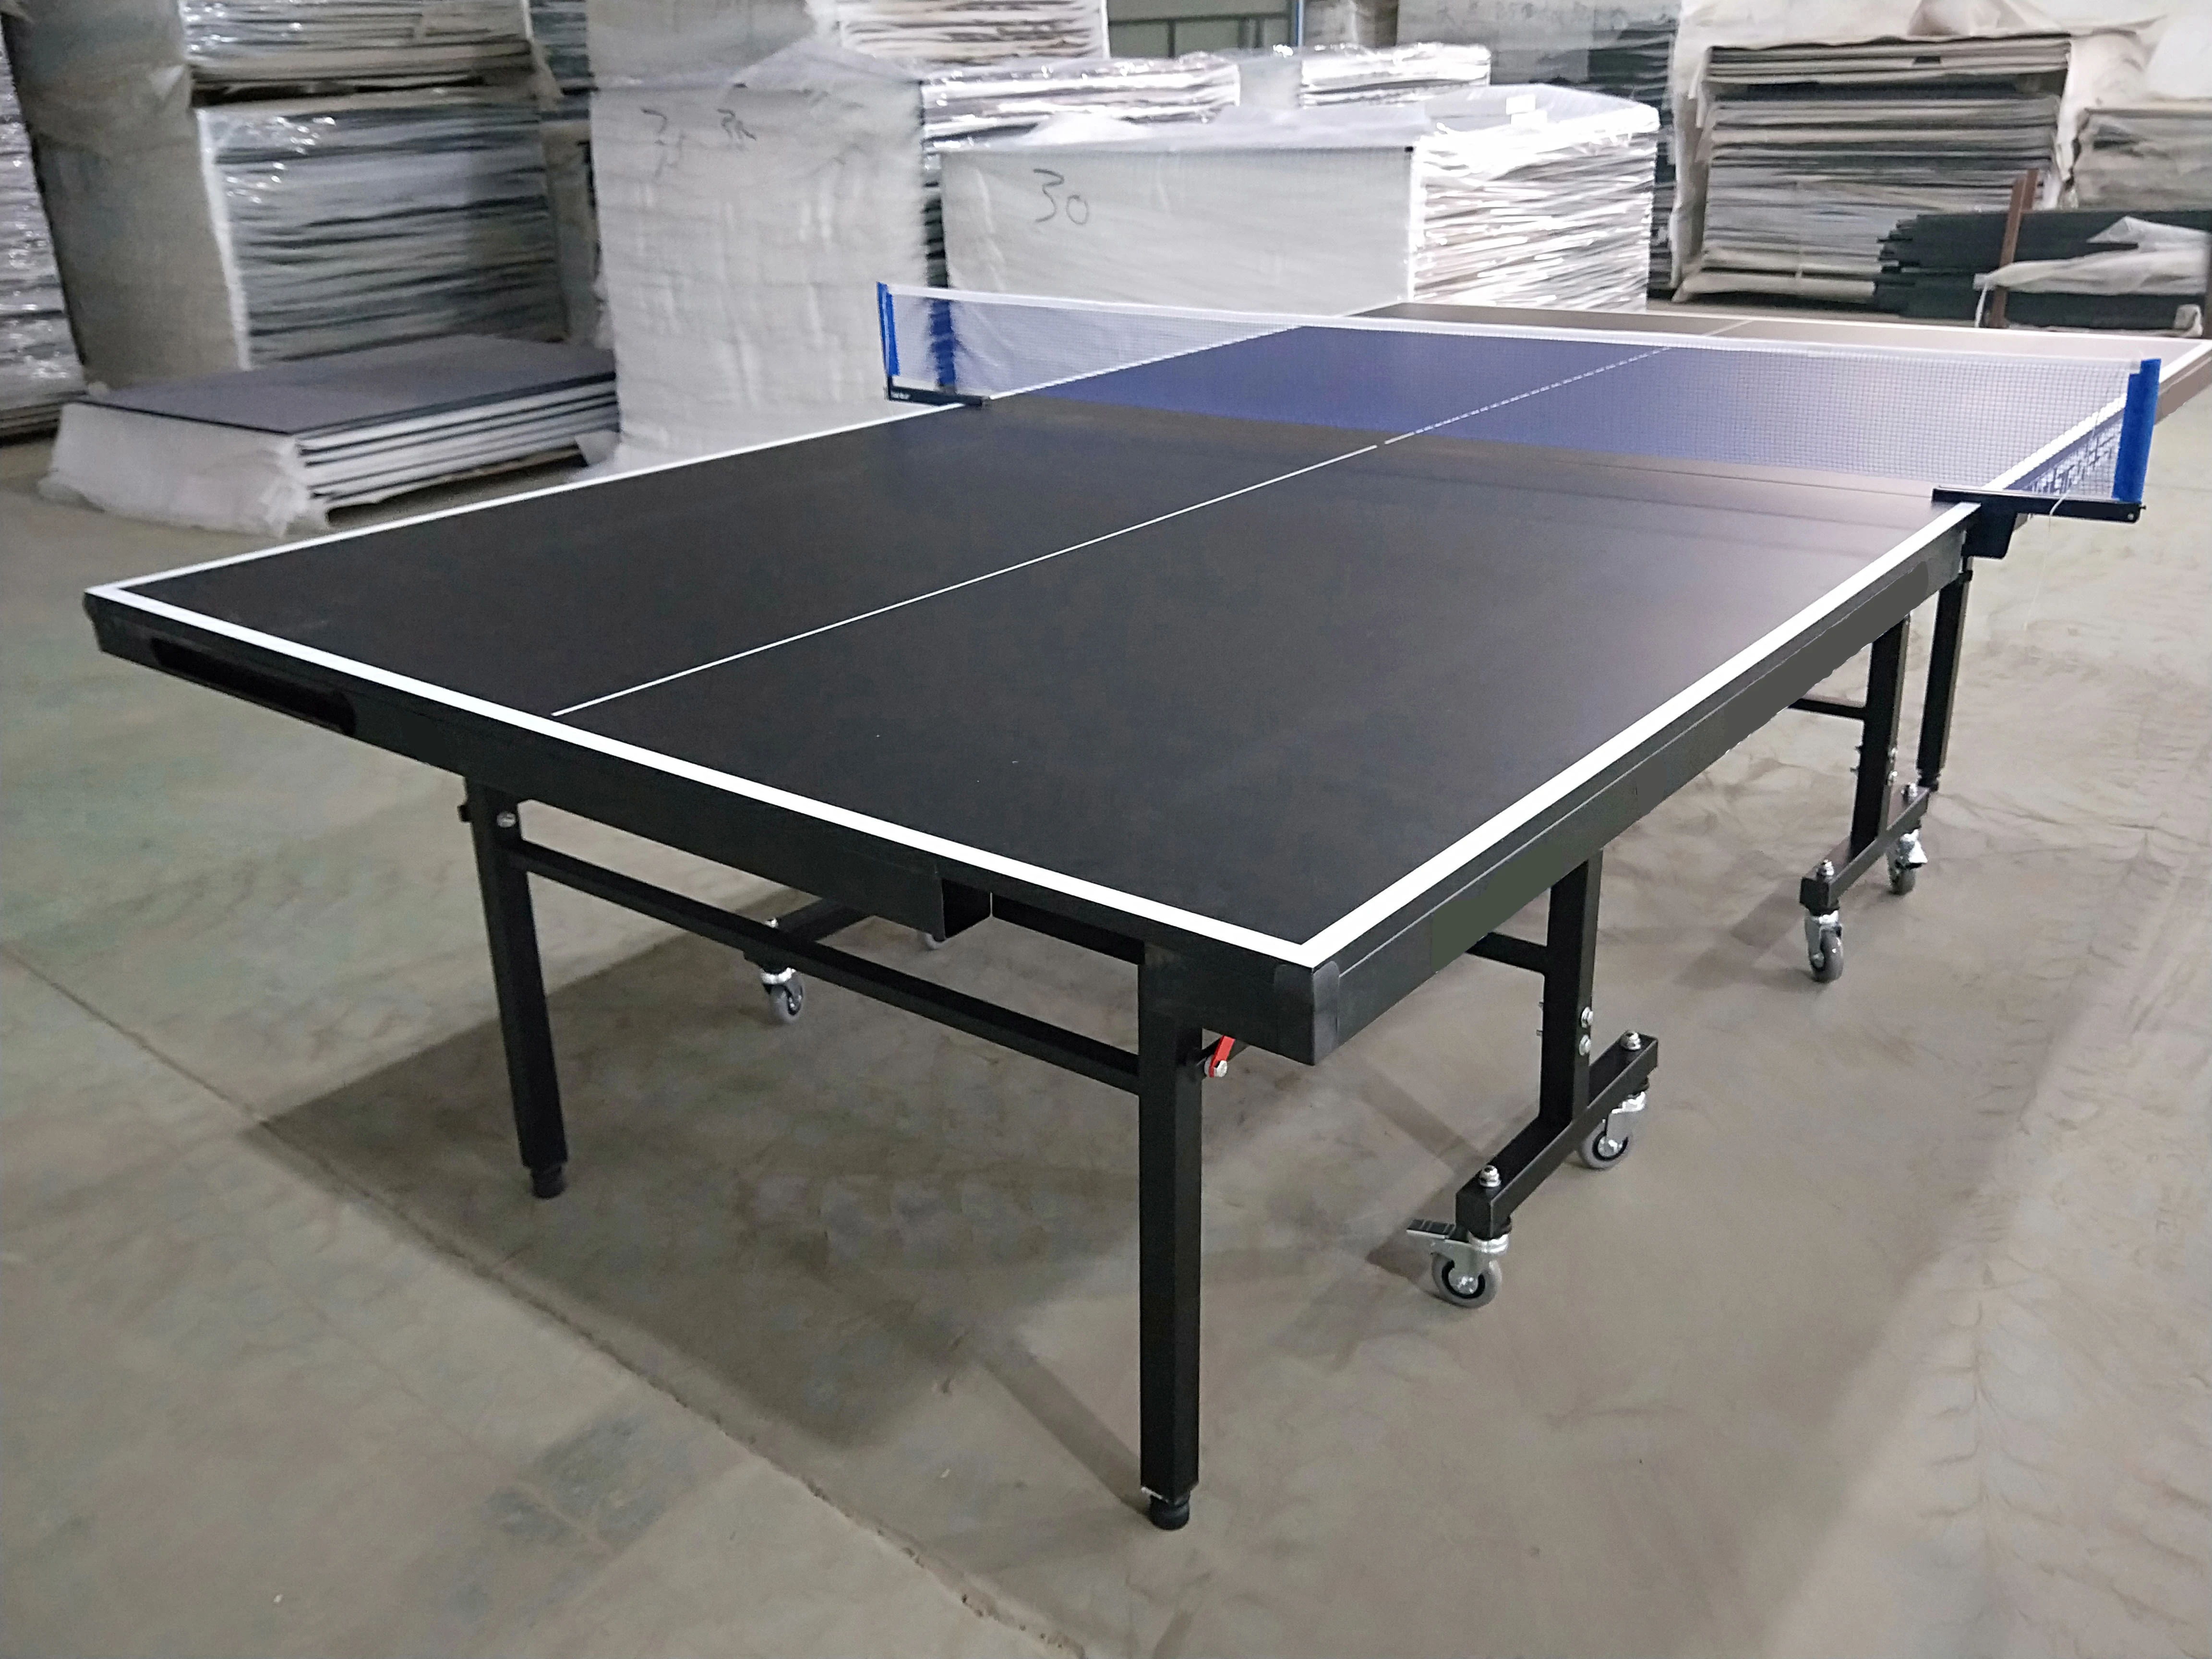 Customized Racket & Ball holder pingpong tables Black TOP Indoor Table Tennis Table with Locking Wheels